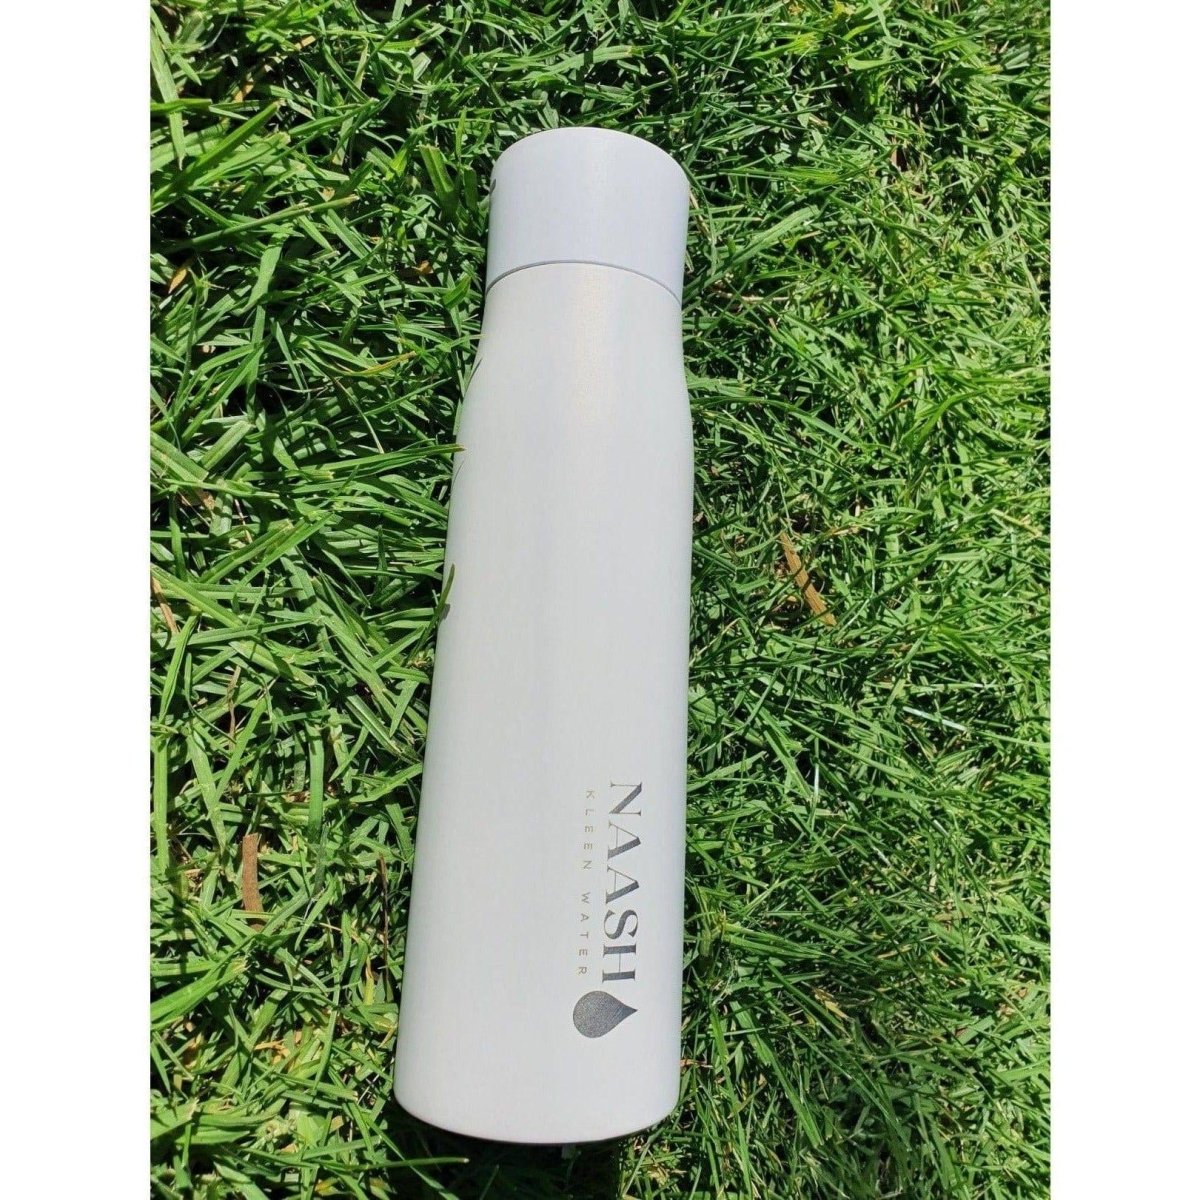 http://www.naash.com.au/cdn/shop/products/cleanquench-self-cleaning-hydroflask-snow-whitenaash-964580.jpg?v=1680856070